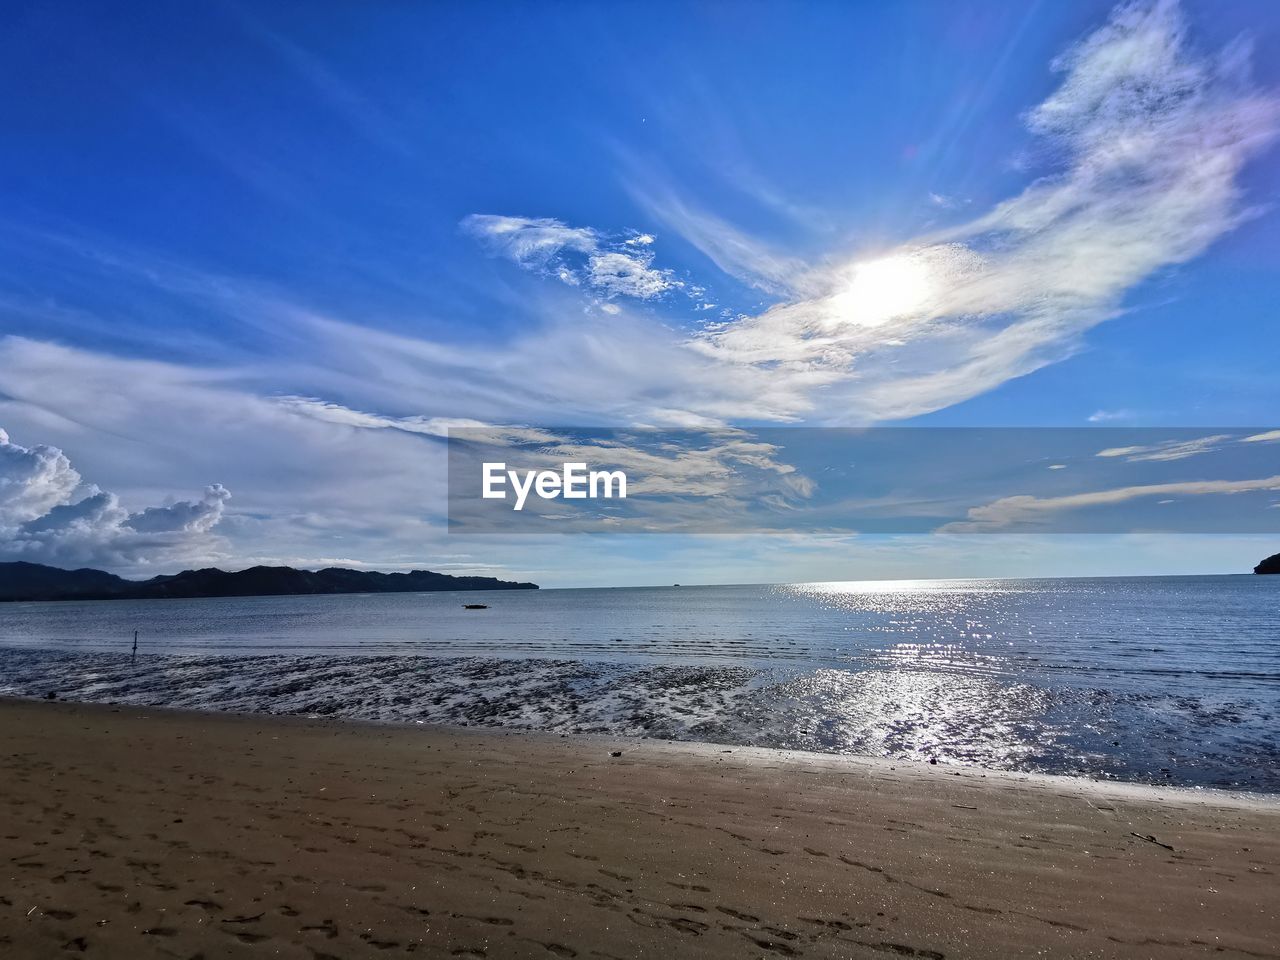 SCENIC VIEW OF BEACH AGAINST BLUE SKY